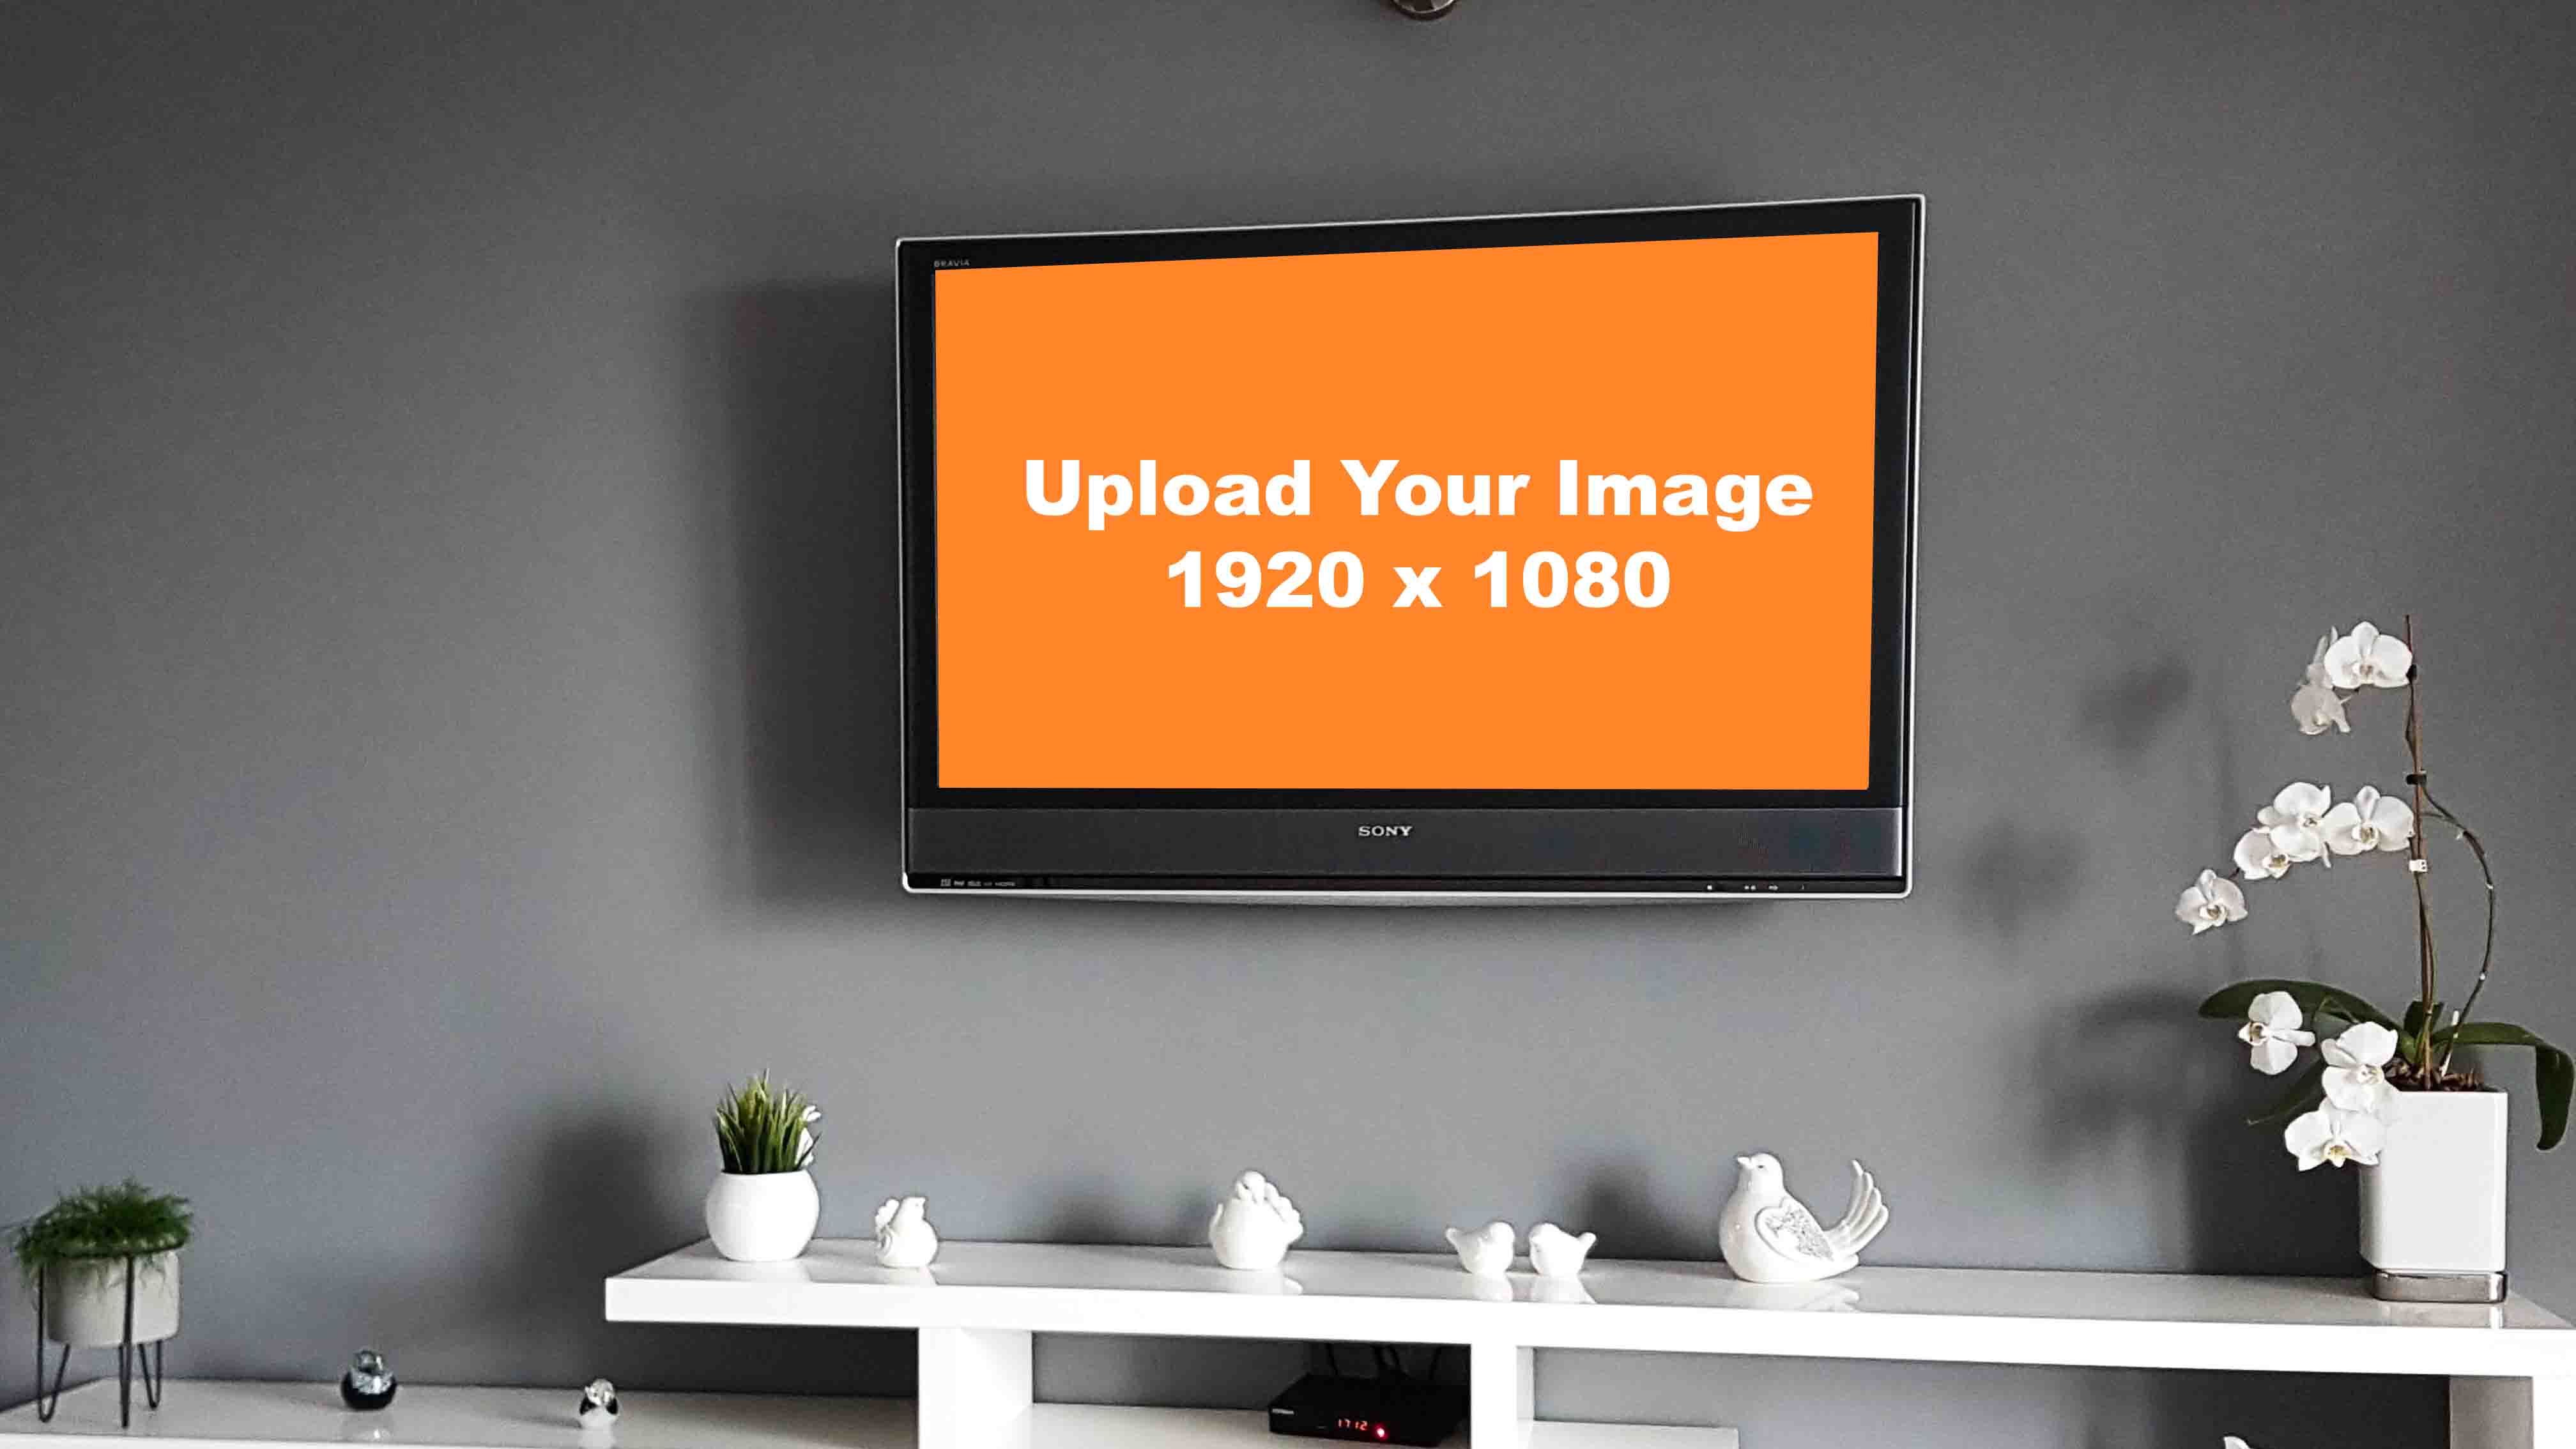 LCD TV Mockup with lounge furniture